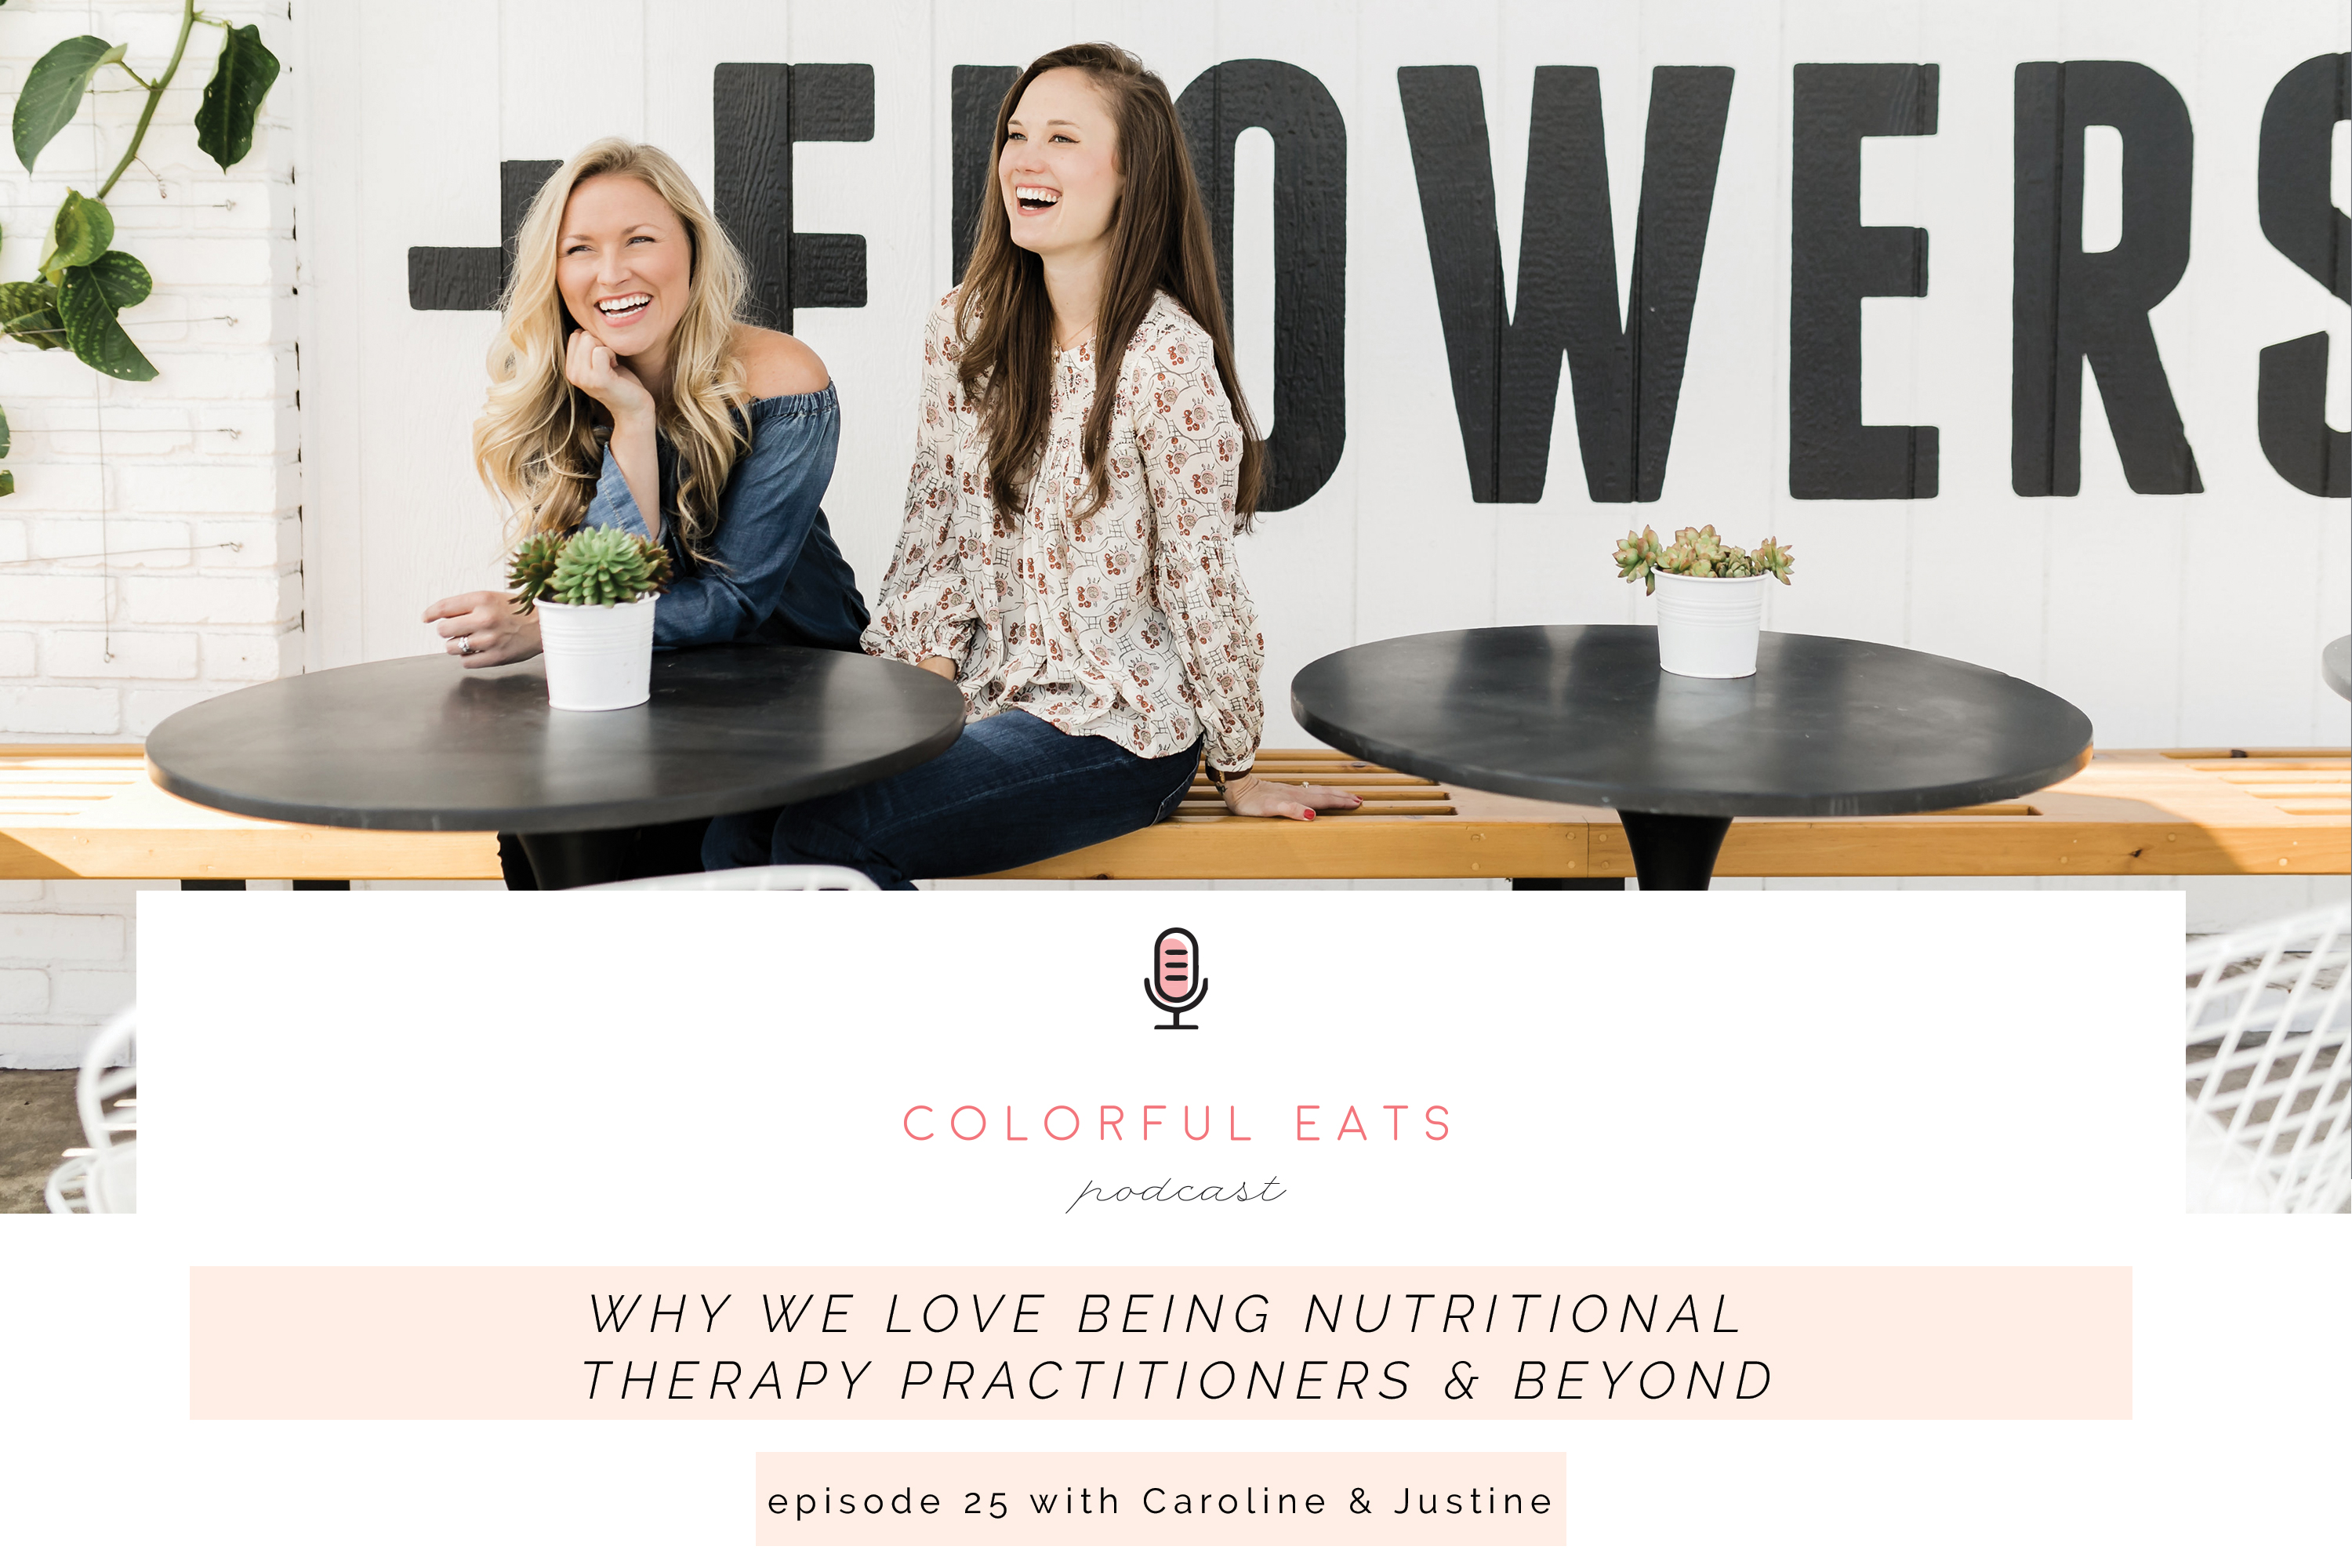 Colorful Eats Podcast: Episode 25 Why We Love Being Nutritional Therapy Practitioners and Beyond